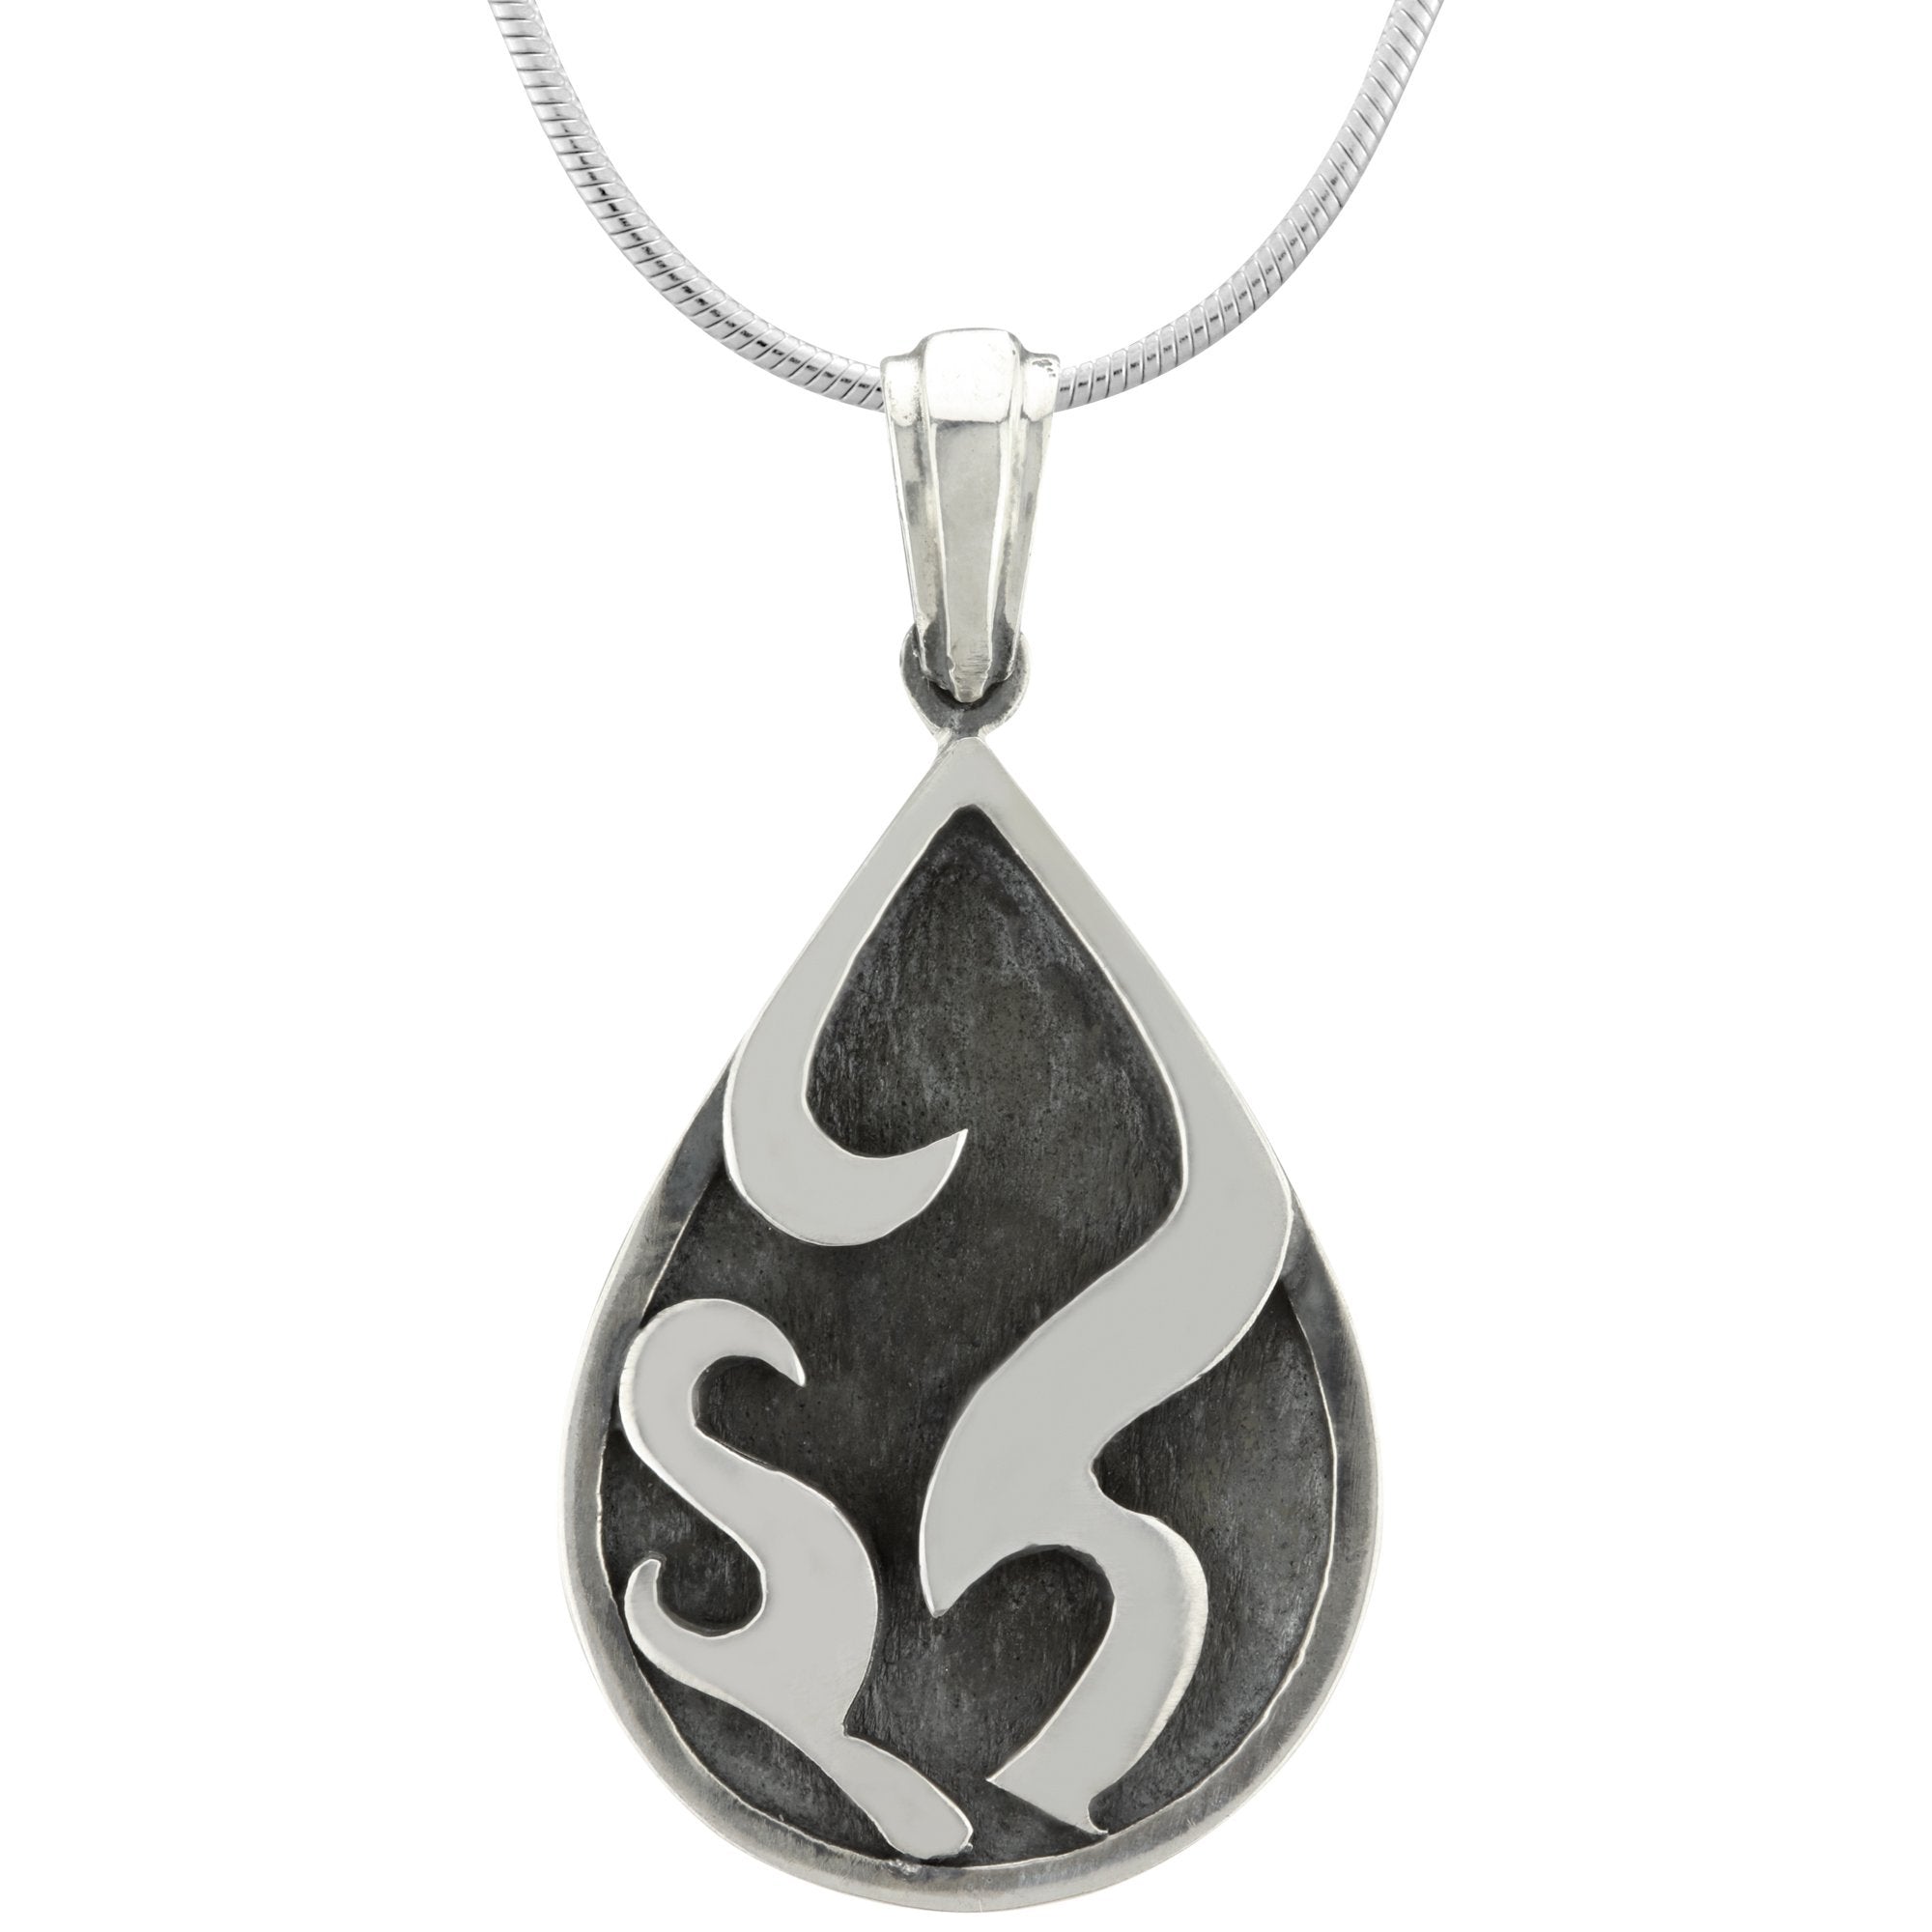 Flames Drop Sterling Necklace - With Snake Chain